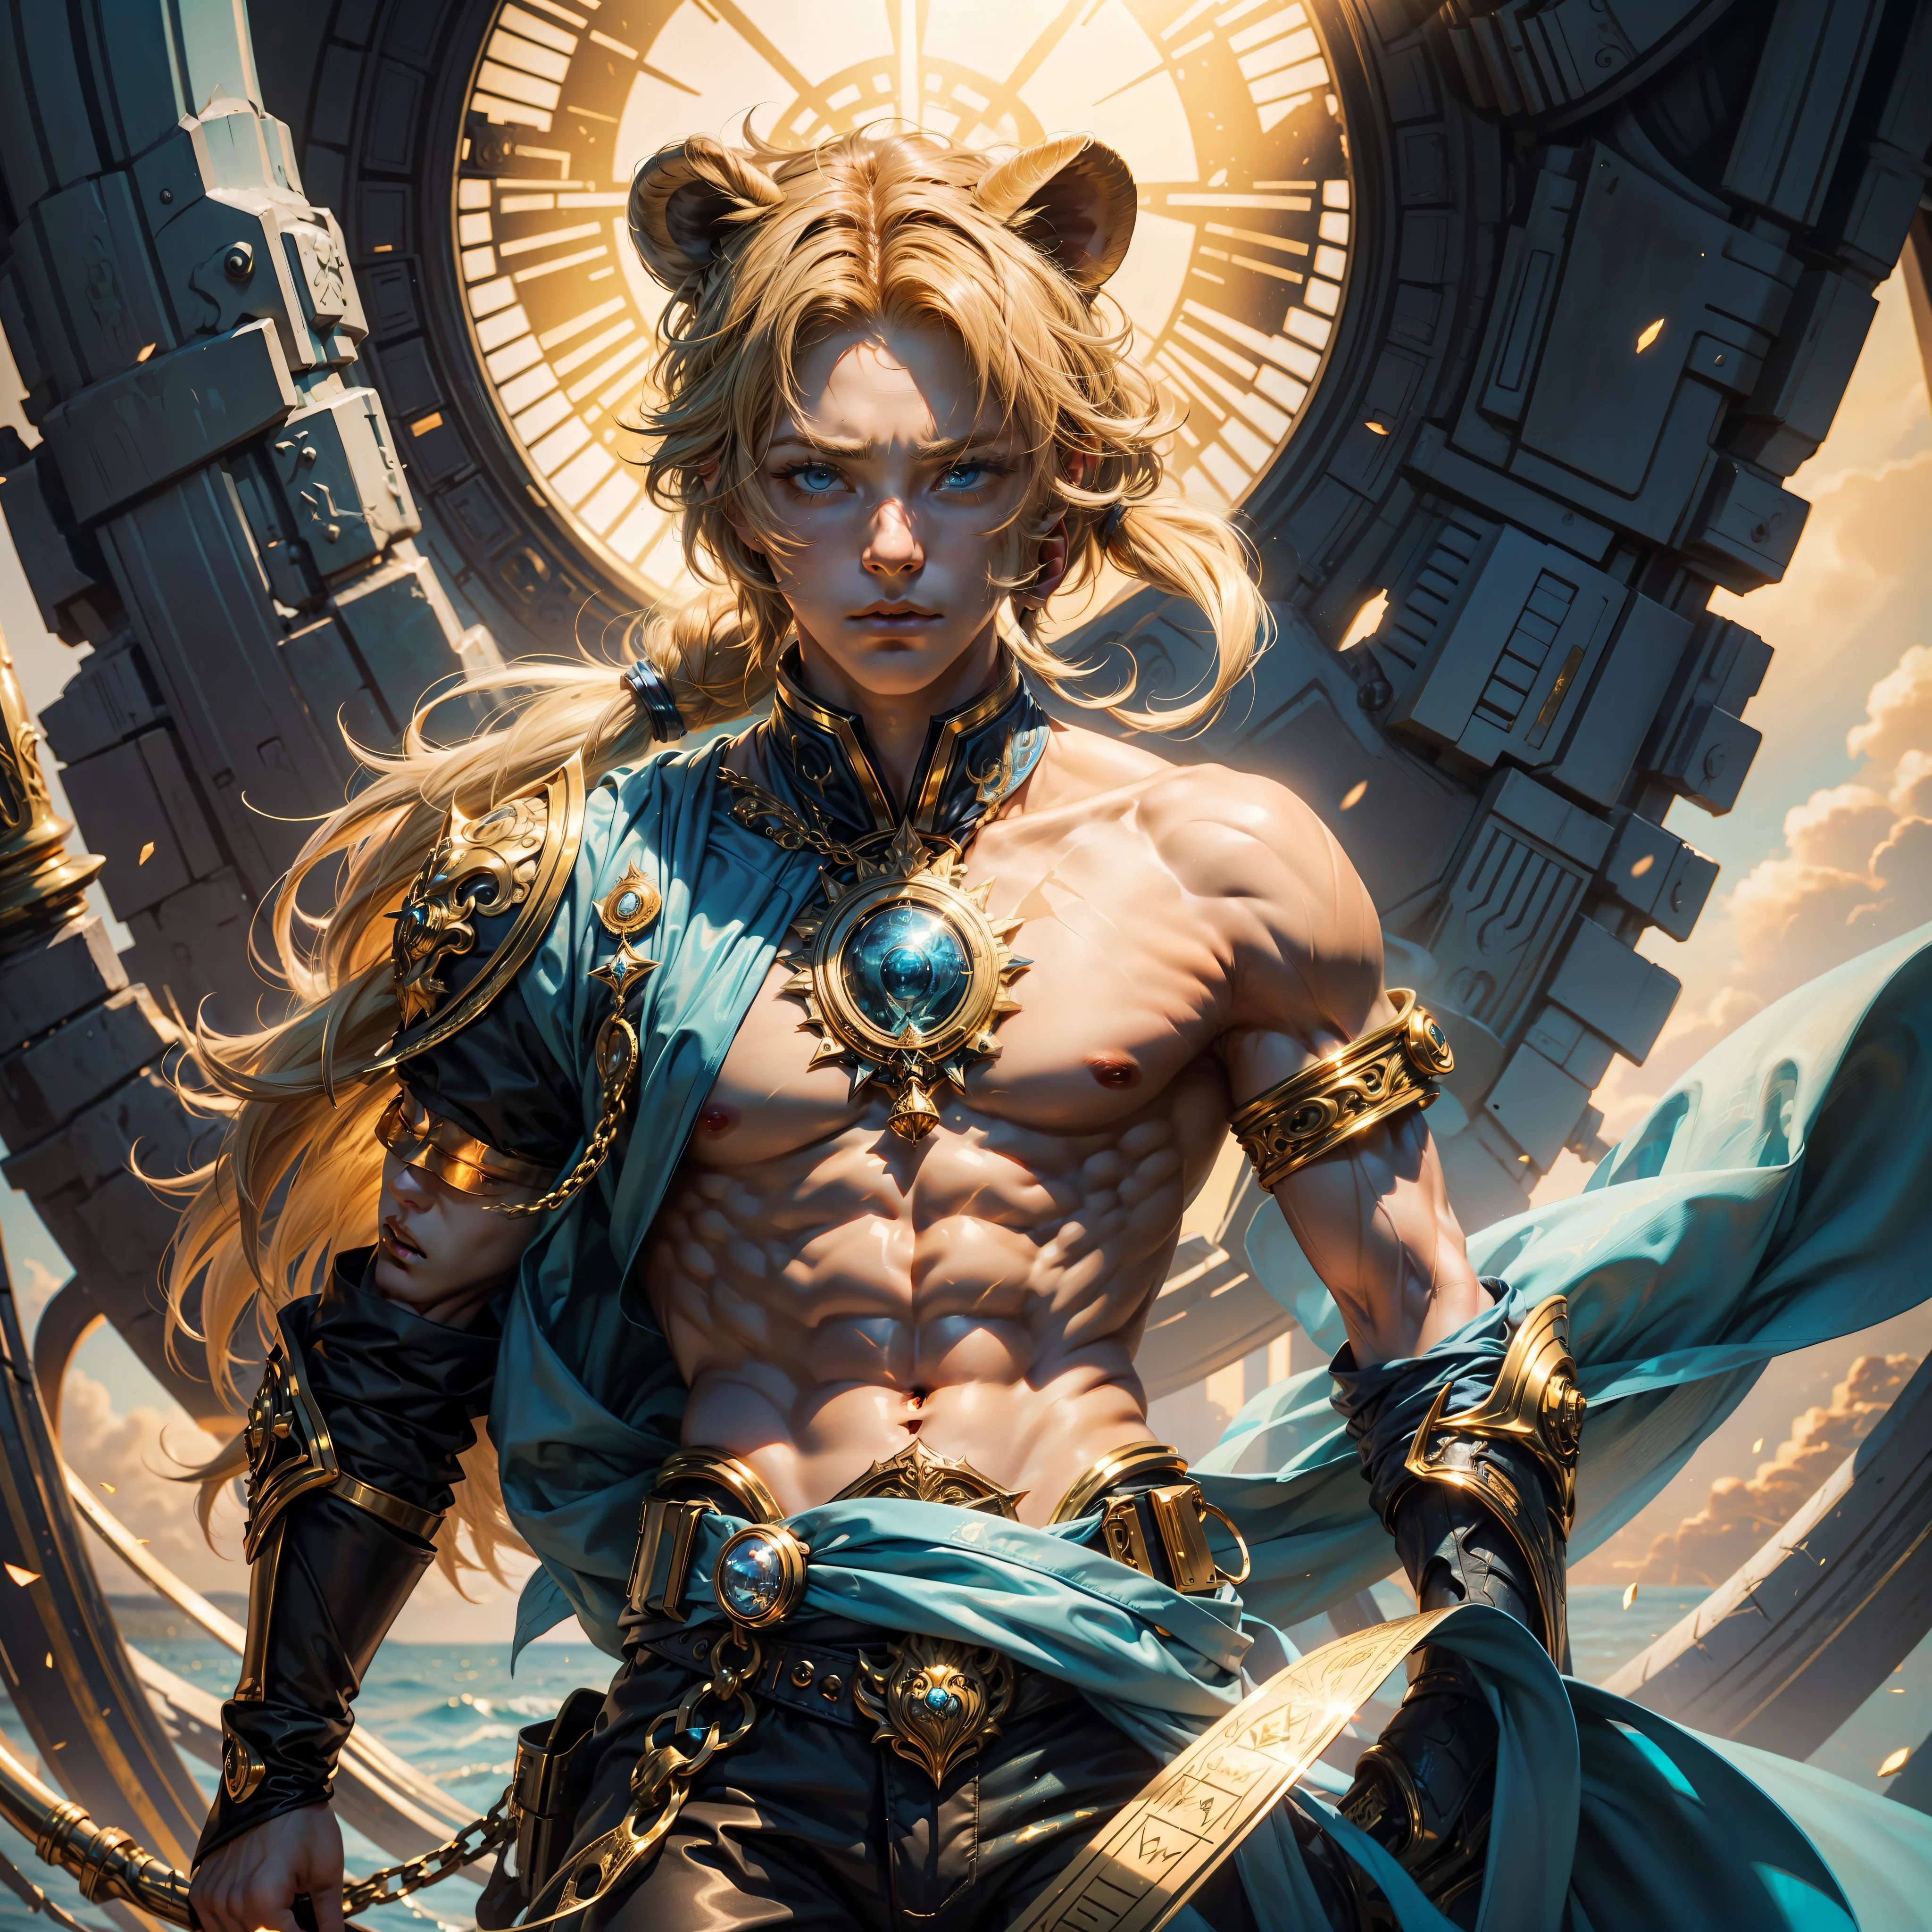 Background with：Magic Golden Leo astrolabe, Blazing golden sun body：A teenager（Don't get angry, Handsome face, Aqua blue eyes, Tufts of blonde hair, A few small pigtails tied, By bangs, The skin is smooth and delicate, True and natural to the touch）, Next to him lies a male lion（Blonde hair, Handsome mane, Mighty and domineering, Ocean blue eyes, Particularly real）, photore, tmasterpiece, ultraclear, Conforms to the anatomy, high detal, high qulity, Colorful, lightand shade contrast, Cinematic lighting effects